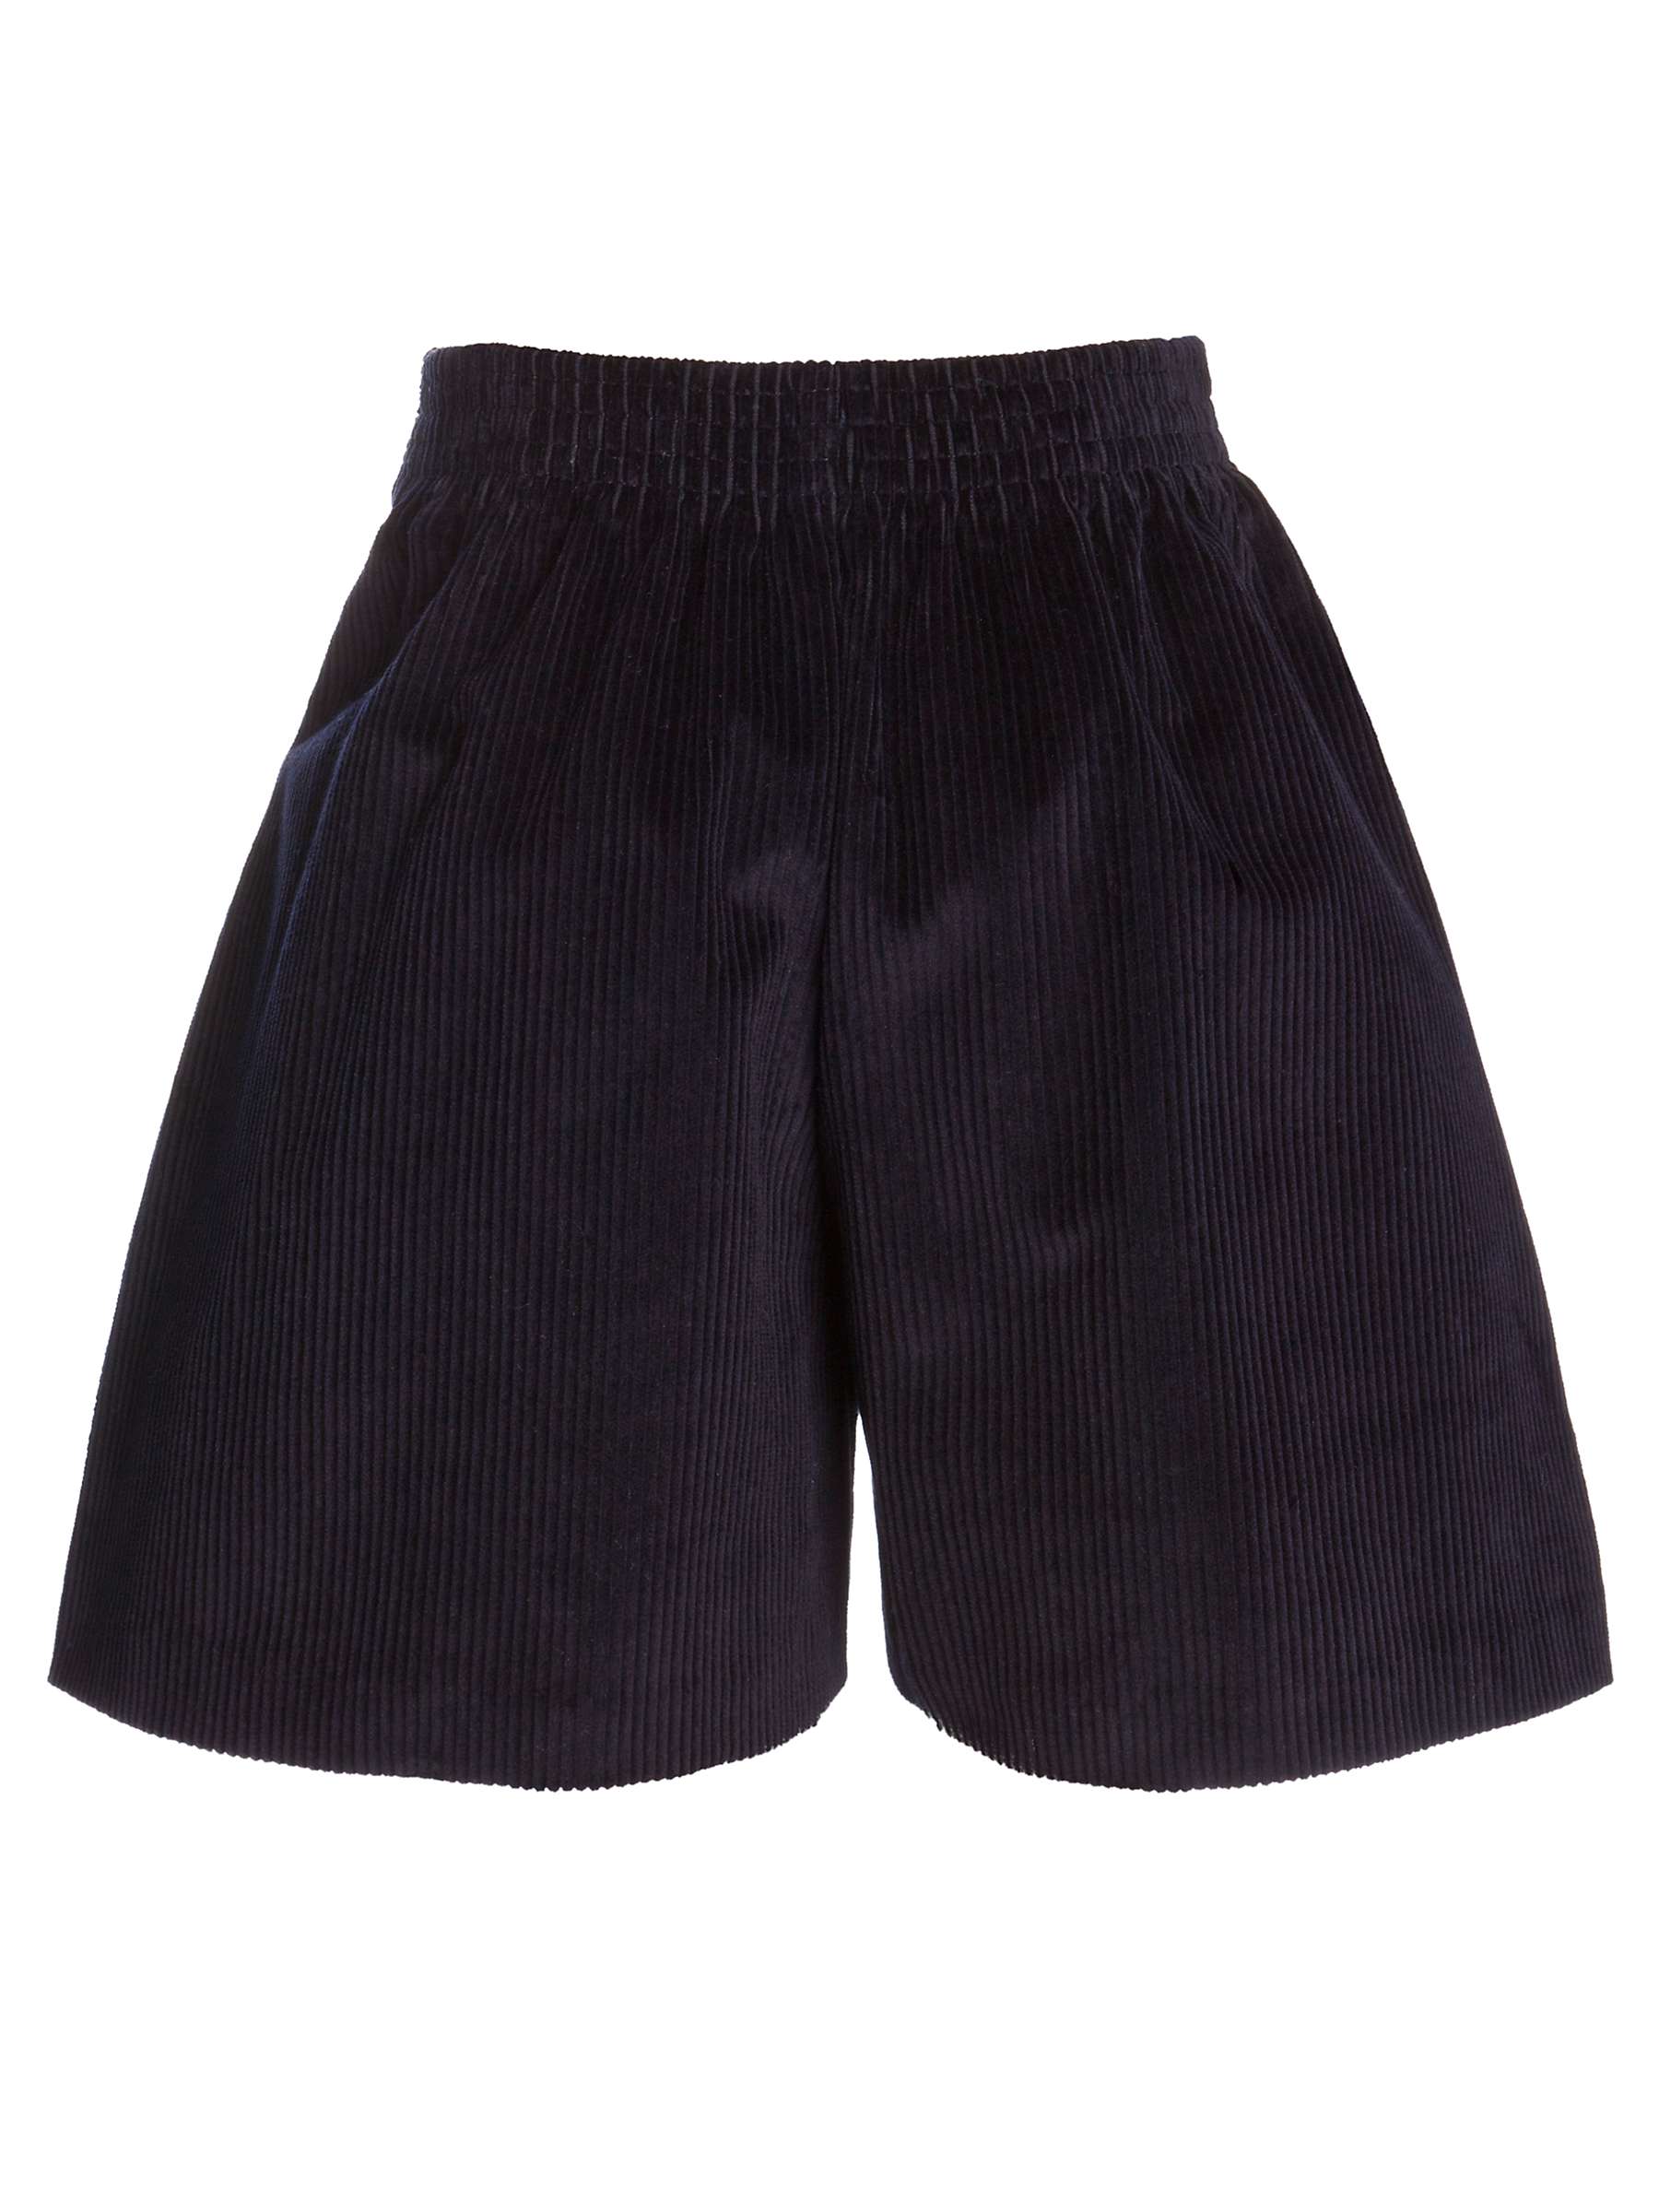 Buy School Girls' Cord Culottes, Navy Online at johnlewis.com